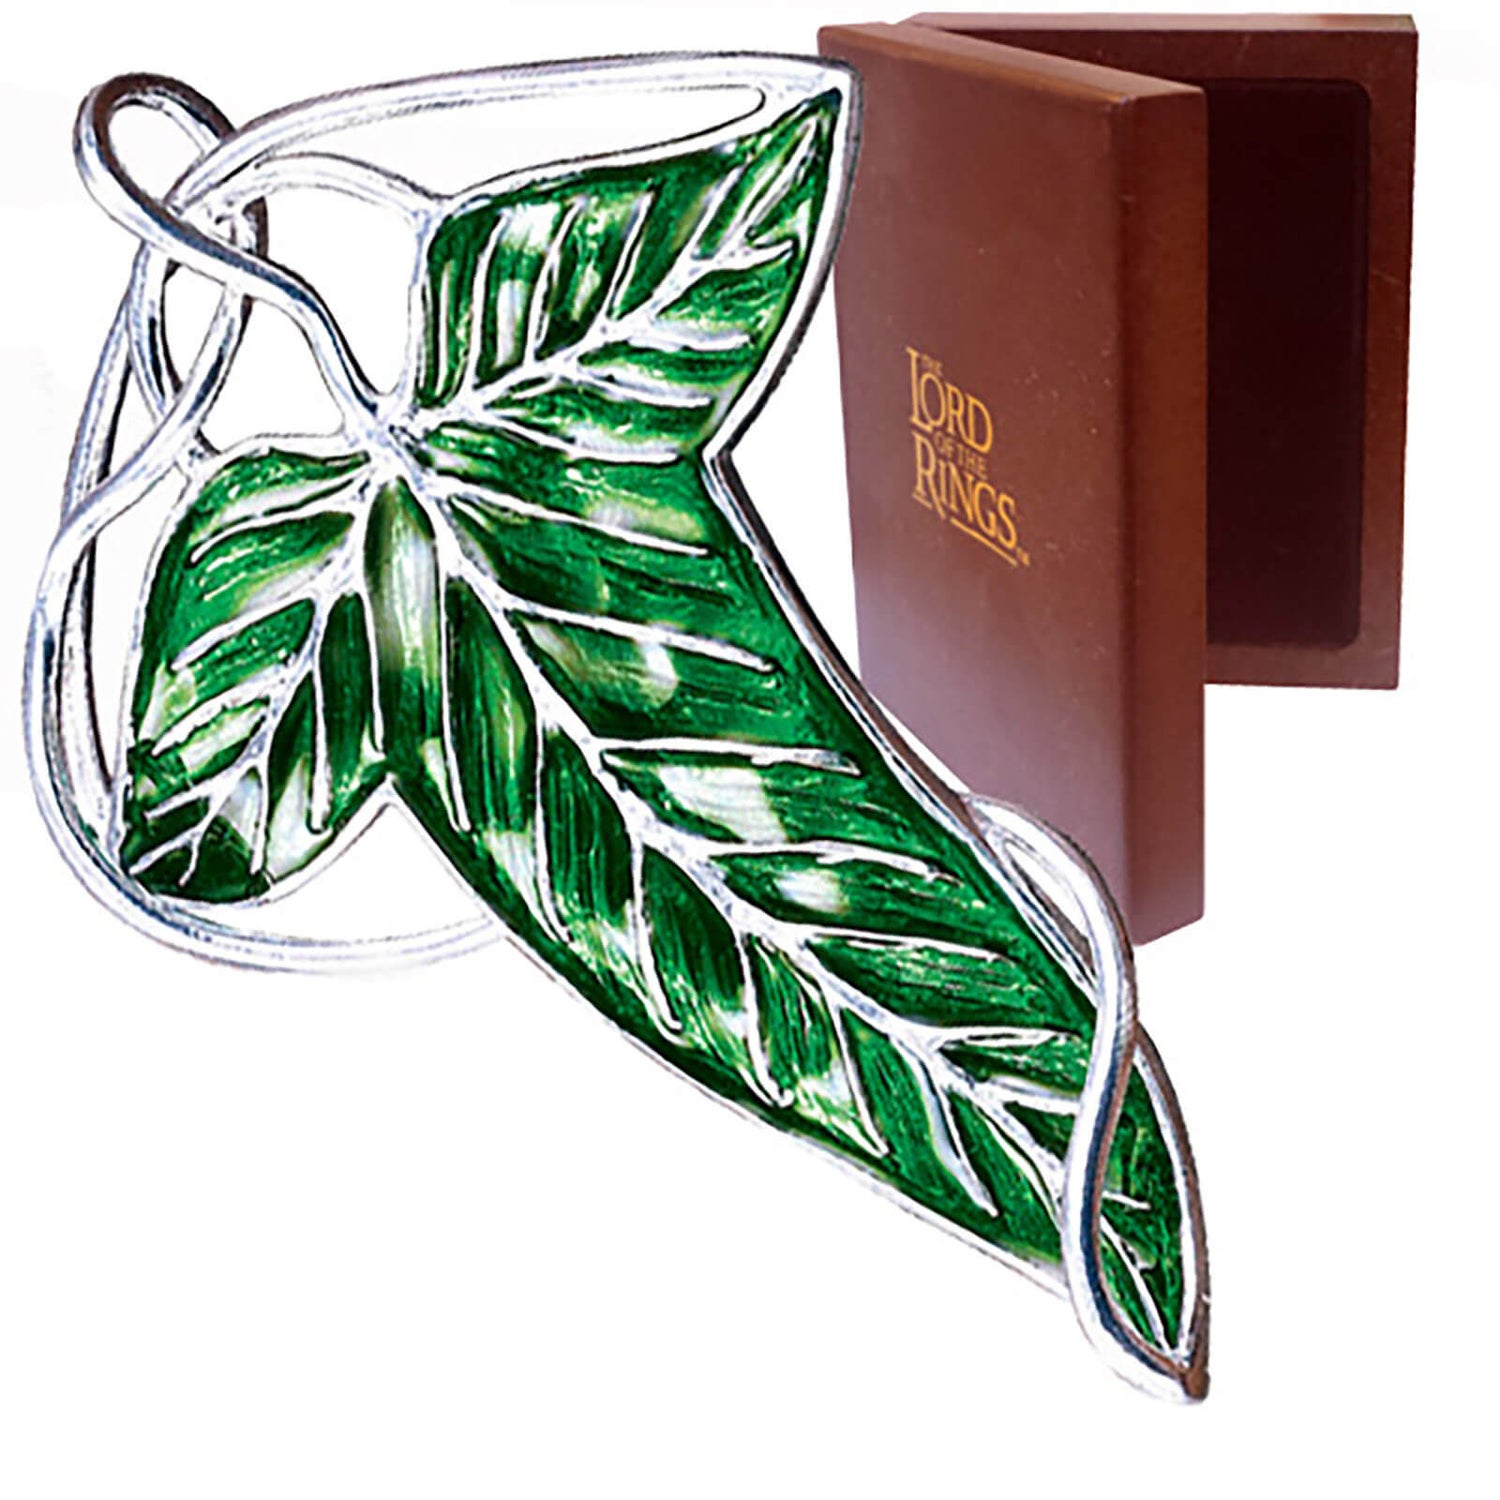 Lord of the Rings Elven Leaf Brooch Replica